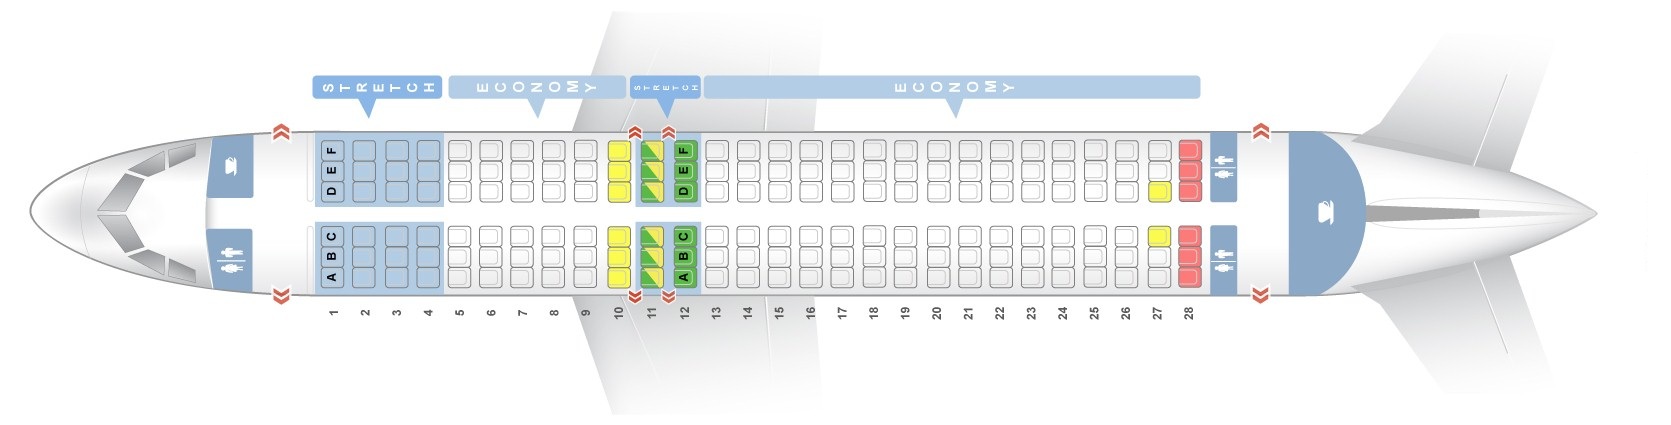 A320 Seating Chart Frontier Airlines